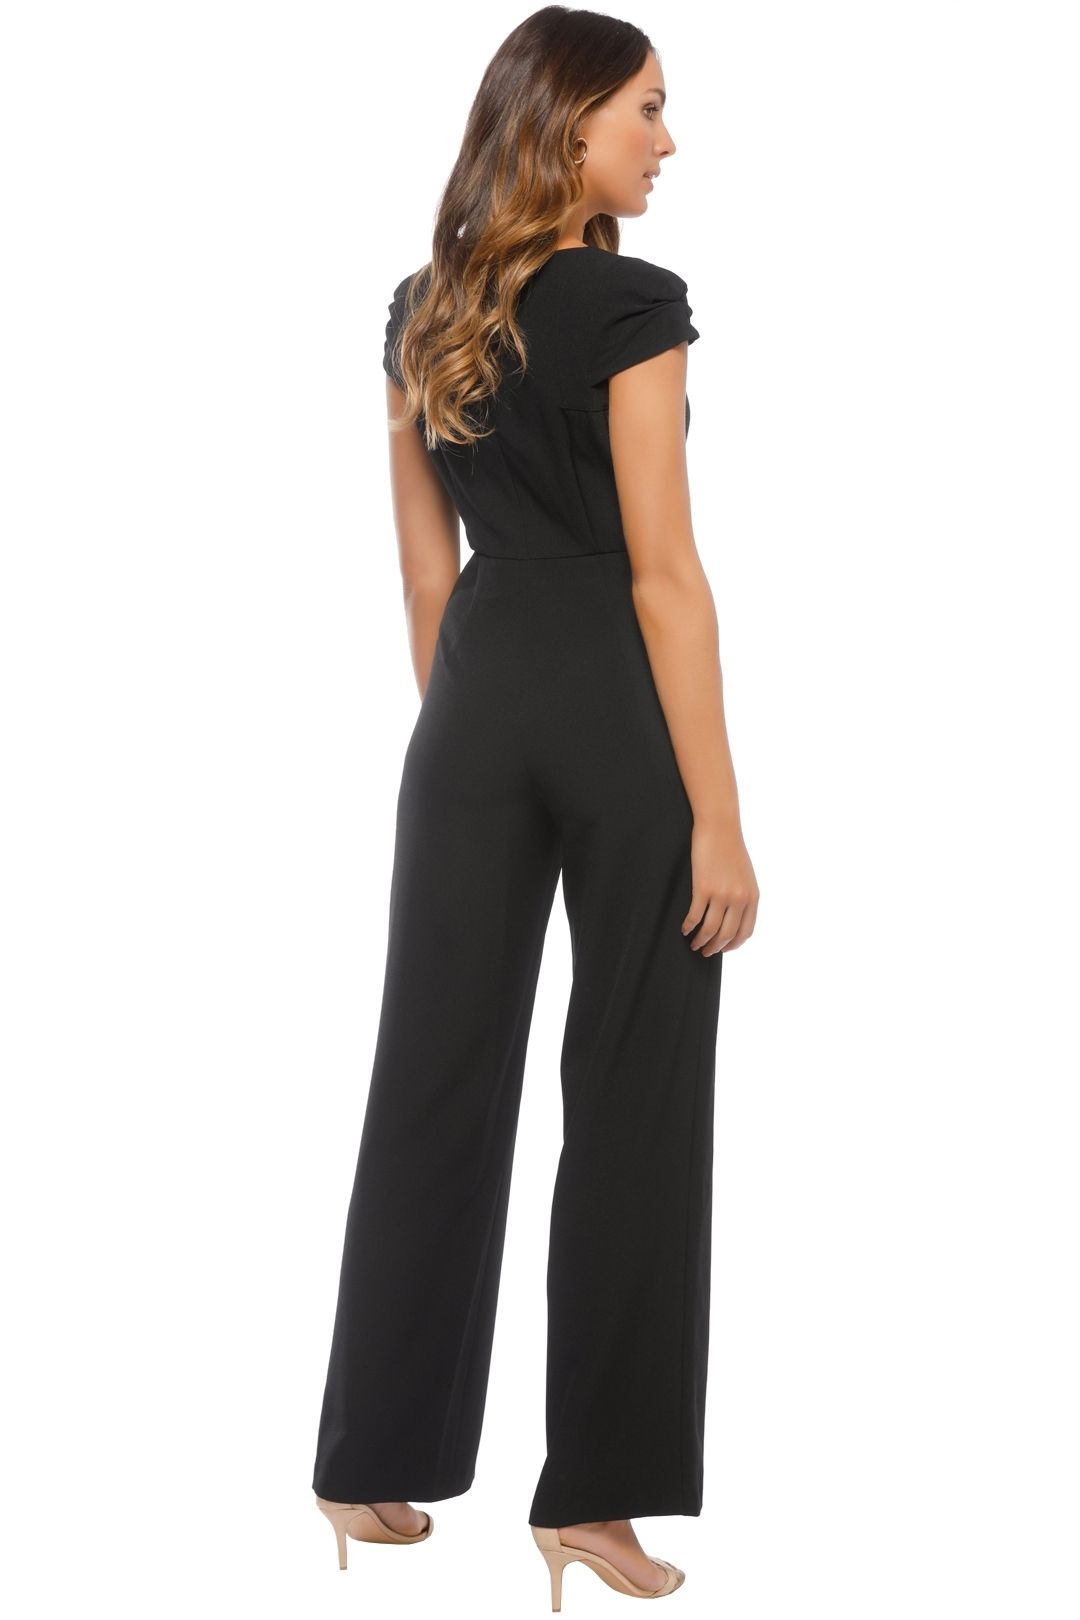 Stretch Crepe Jumpsuit by Adrianna Papell for Rent